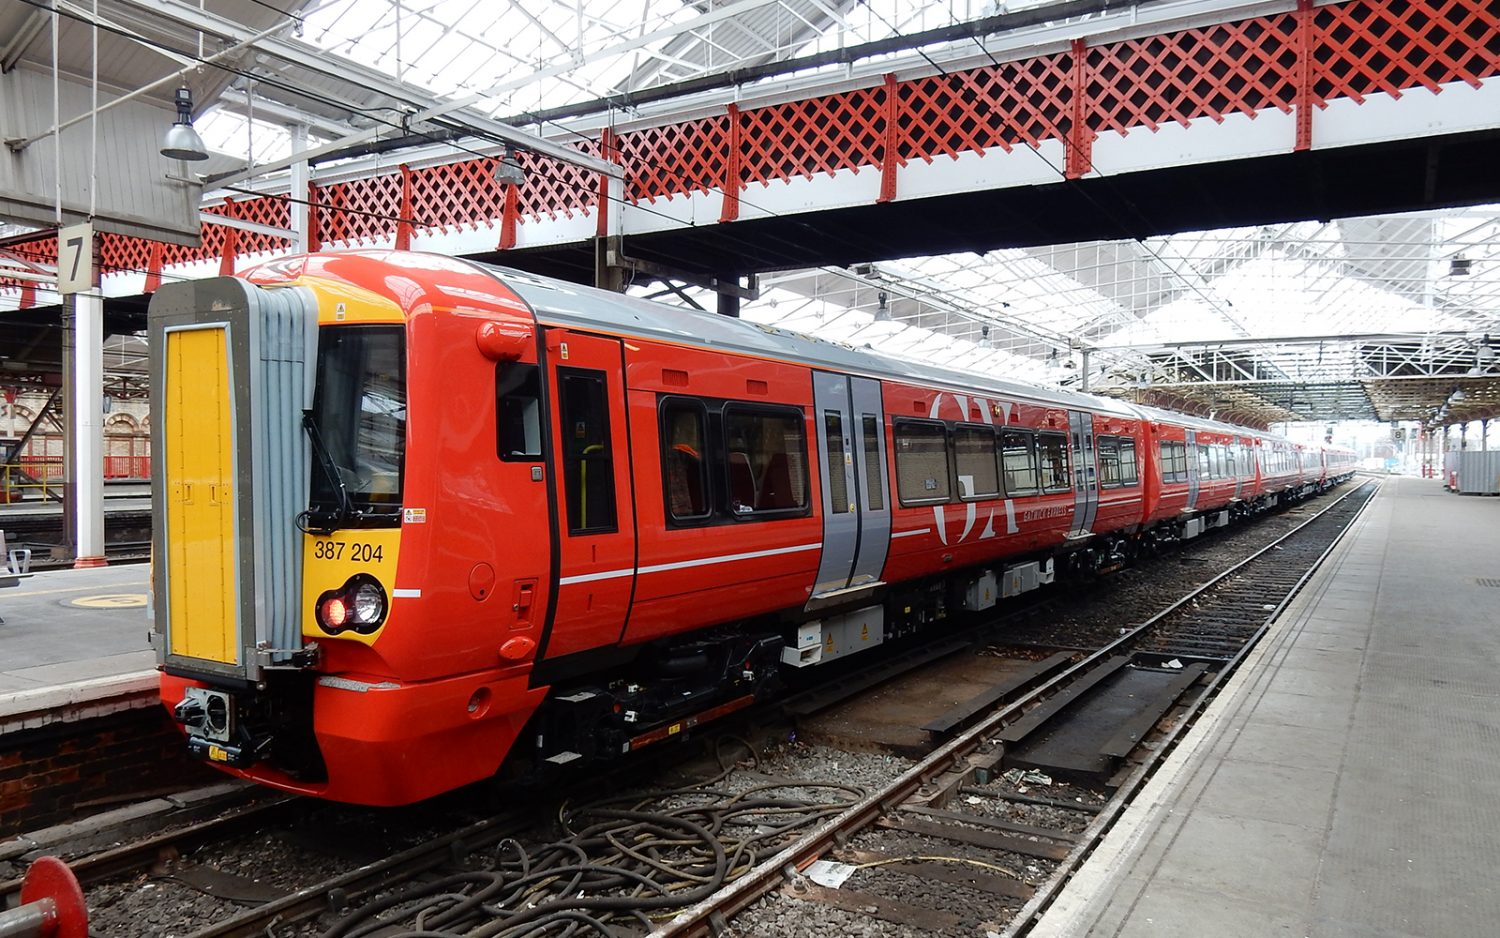 London Gatwick Express Tickets - Only 